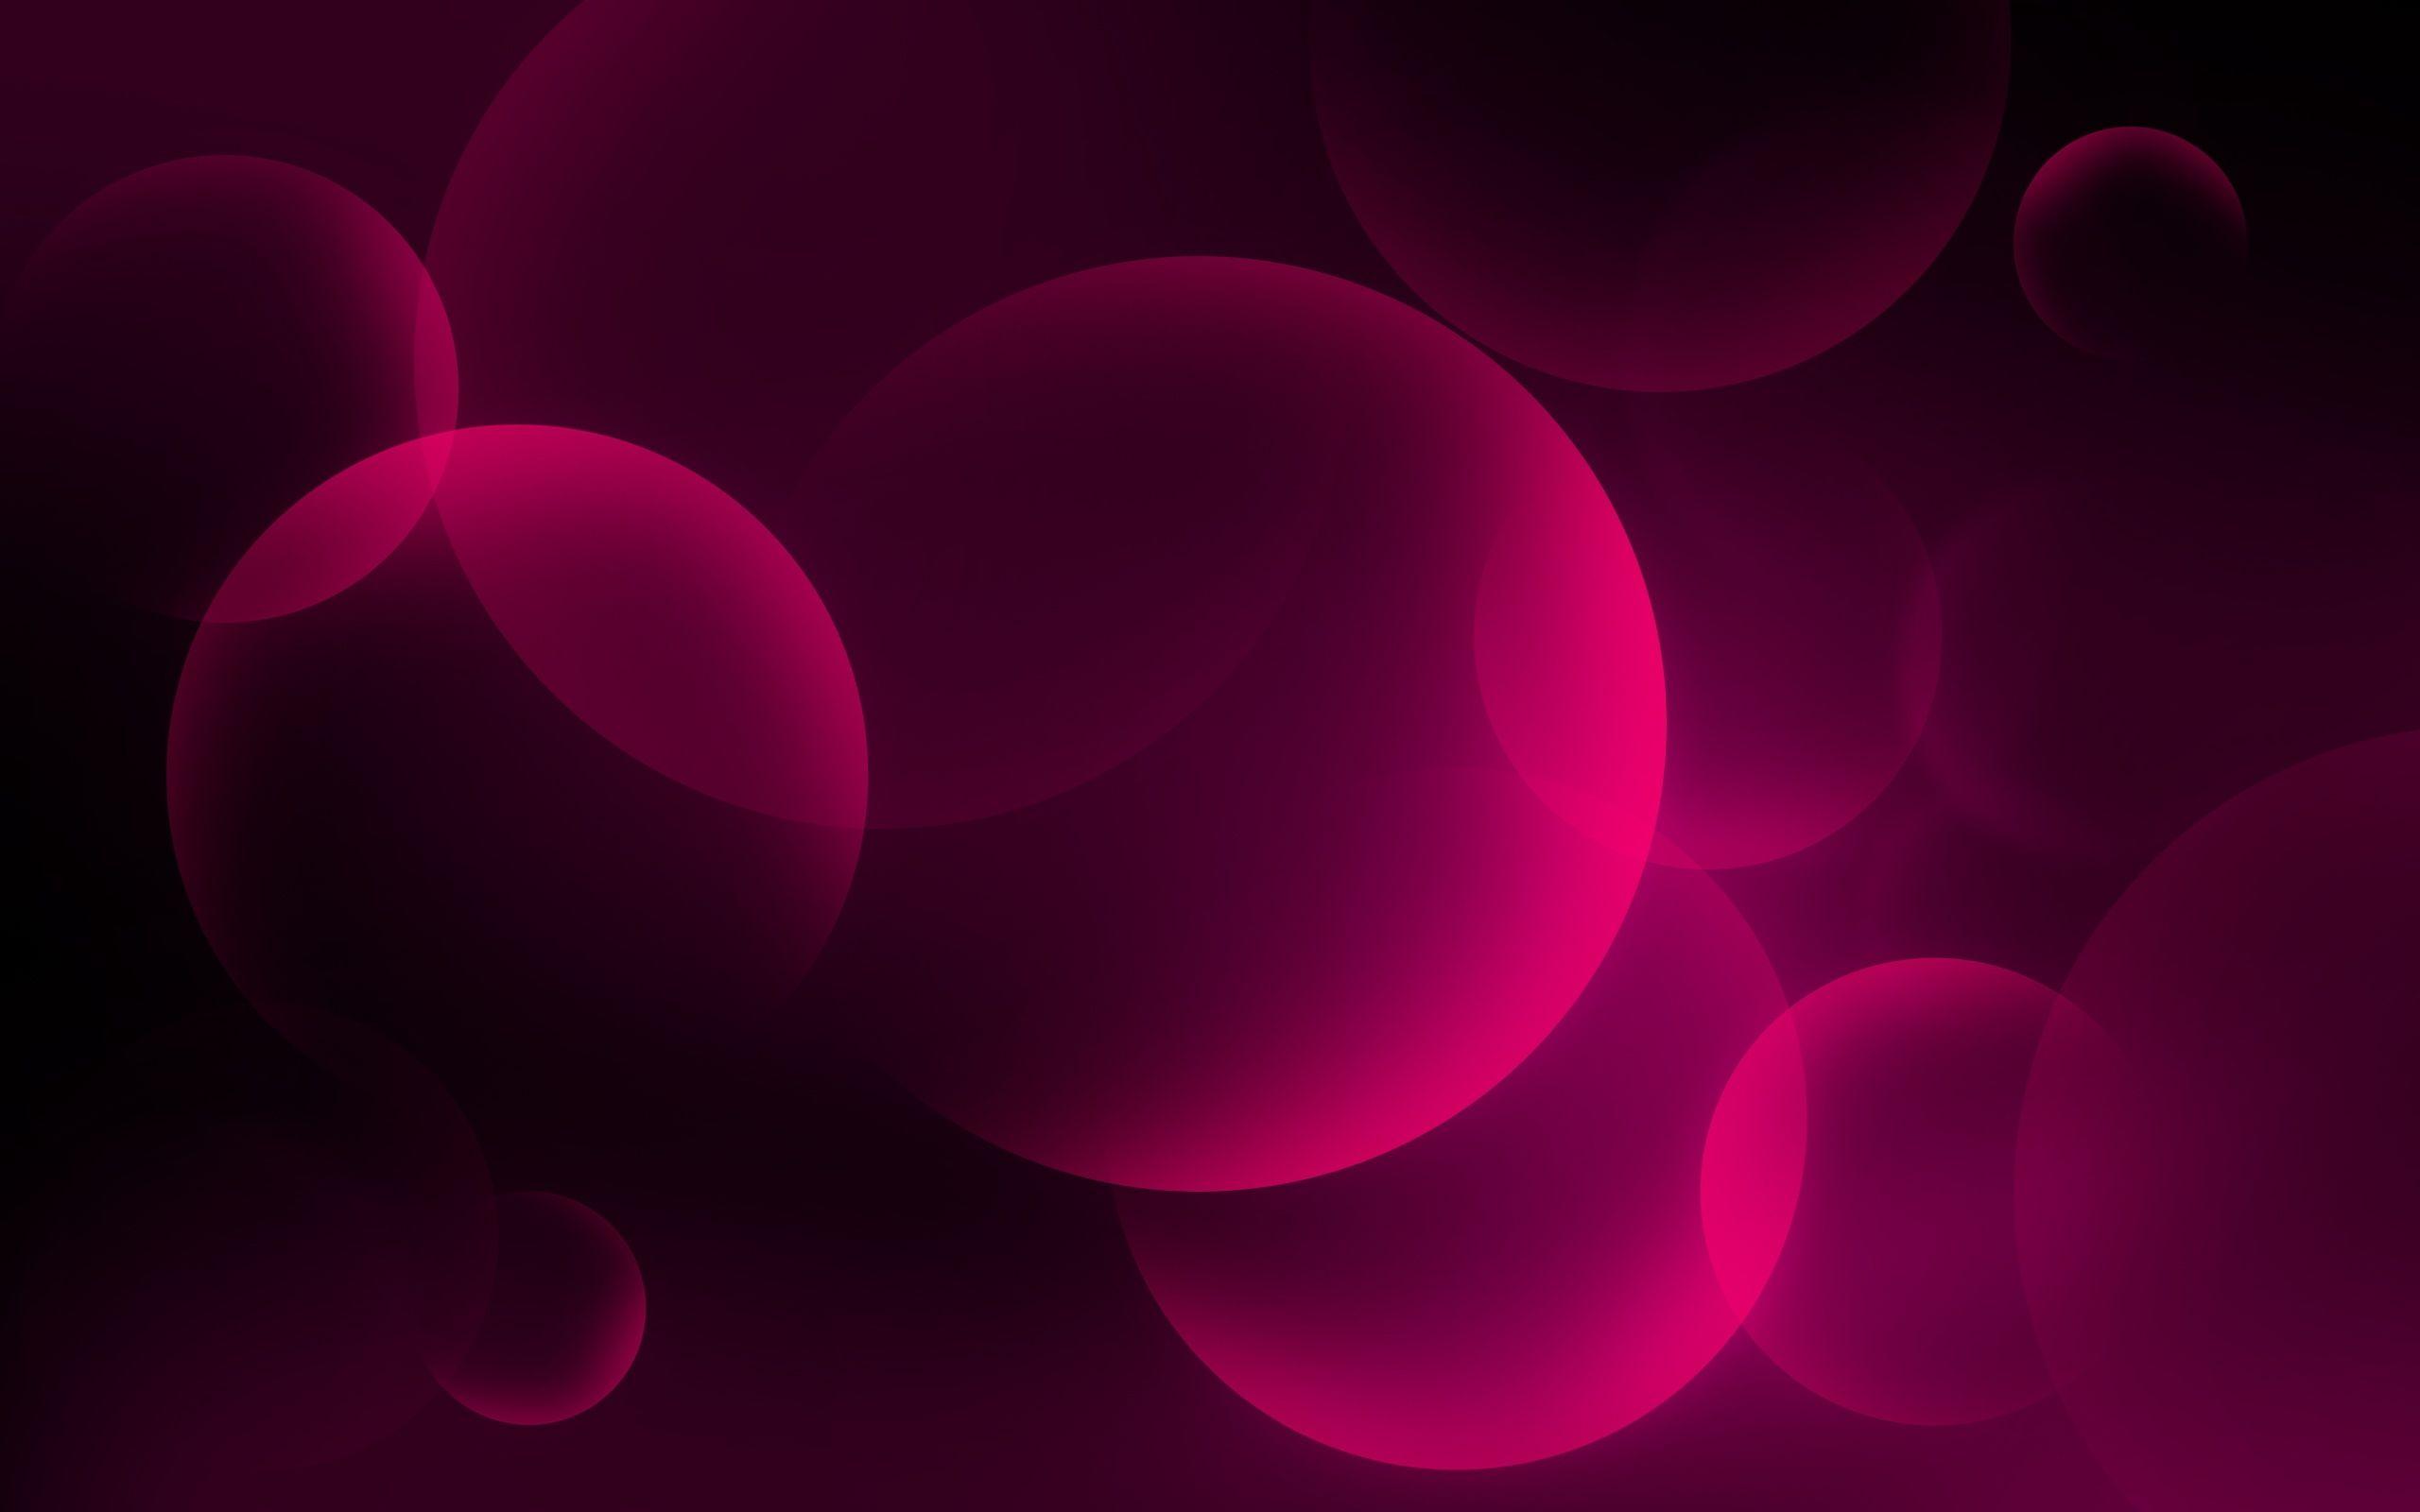 Wallpaper For > Pink And Black Background Image